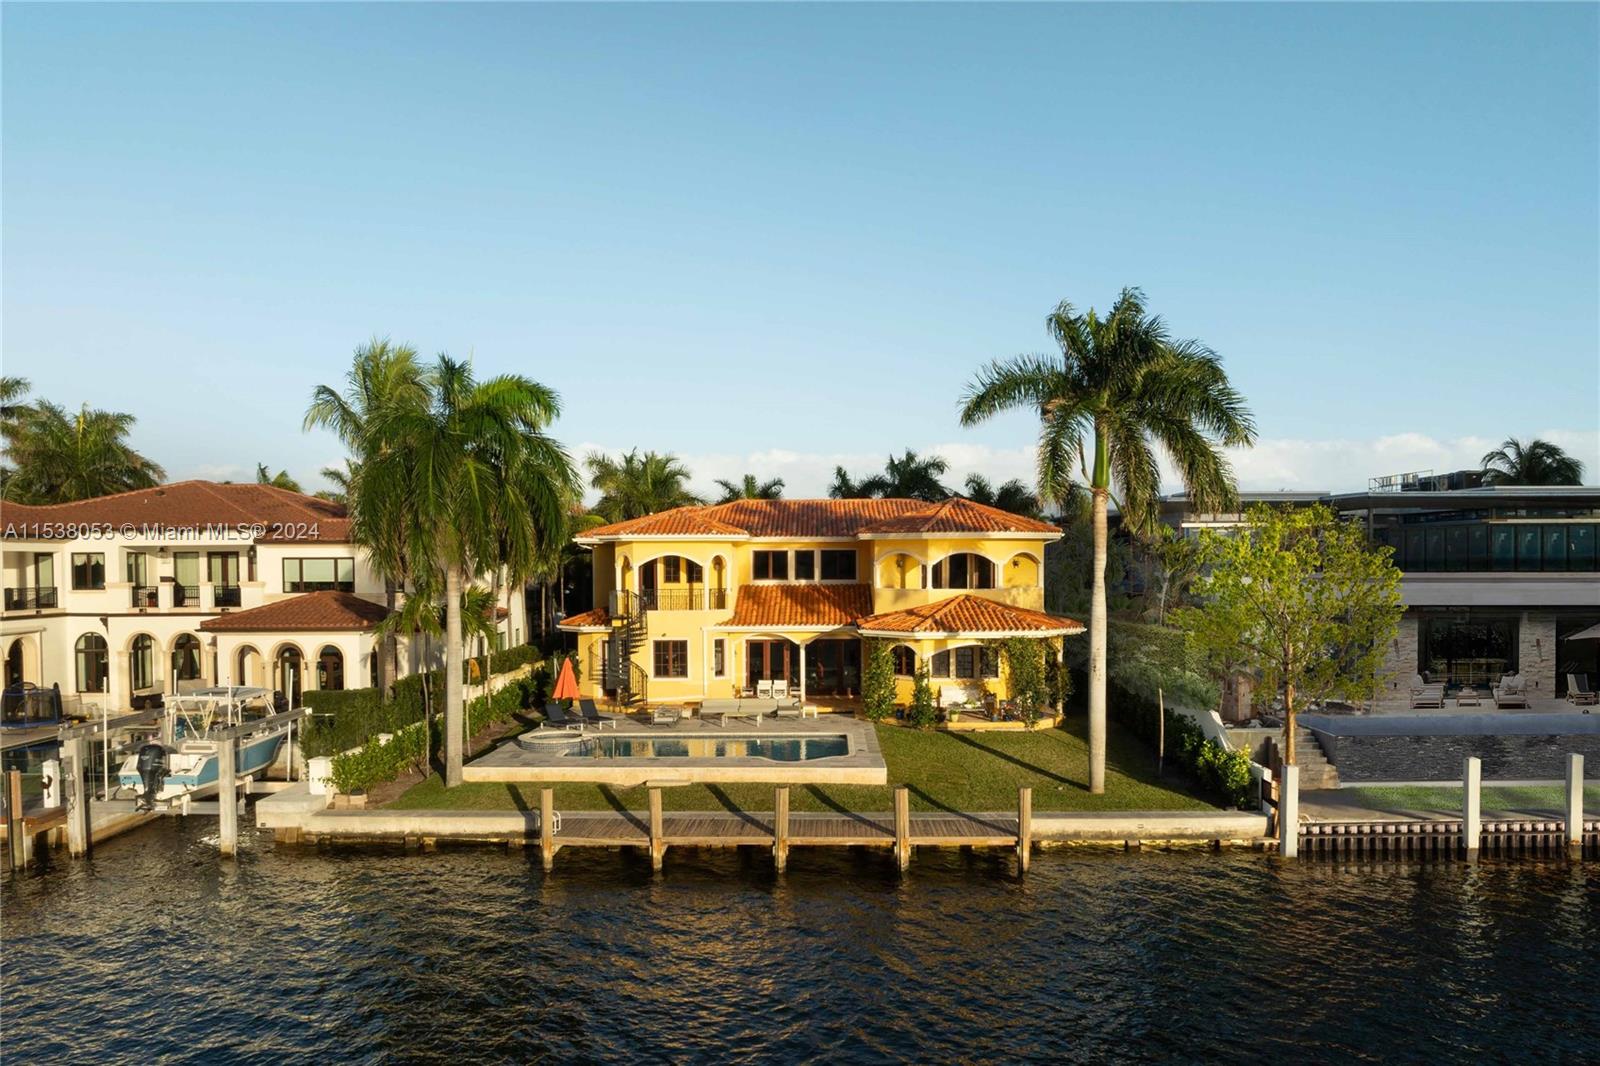 Boasting 85’+/- of waterfront on the picturesque Golden Beach Canal, this stunning residence offers impeccable views and an ideal locale. Completed in 2006, the 6,000 SF+/- main residence features 5 bedrooms, 6 full and 1 half bathrooms, and top-of-the-line finishes throughout. Situated on a 0.32 acre+/- lot with a private dock, this western-facing home provides the perfect backdrop for enjoying breathtaking sunsets over the water. With spacious living areas spread across two levels, including 3,091 SF+/- on the first level and 2,274 SF+/- on the second level, this home offers ample space for relaxation and entertainment. Additional features include a private dock, and an attached 2-car garage, ensuring convenience and security for your vehicles.